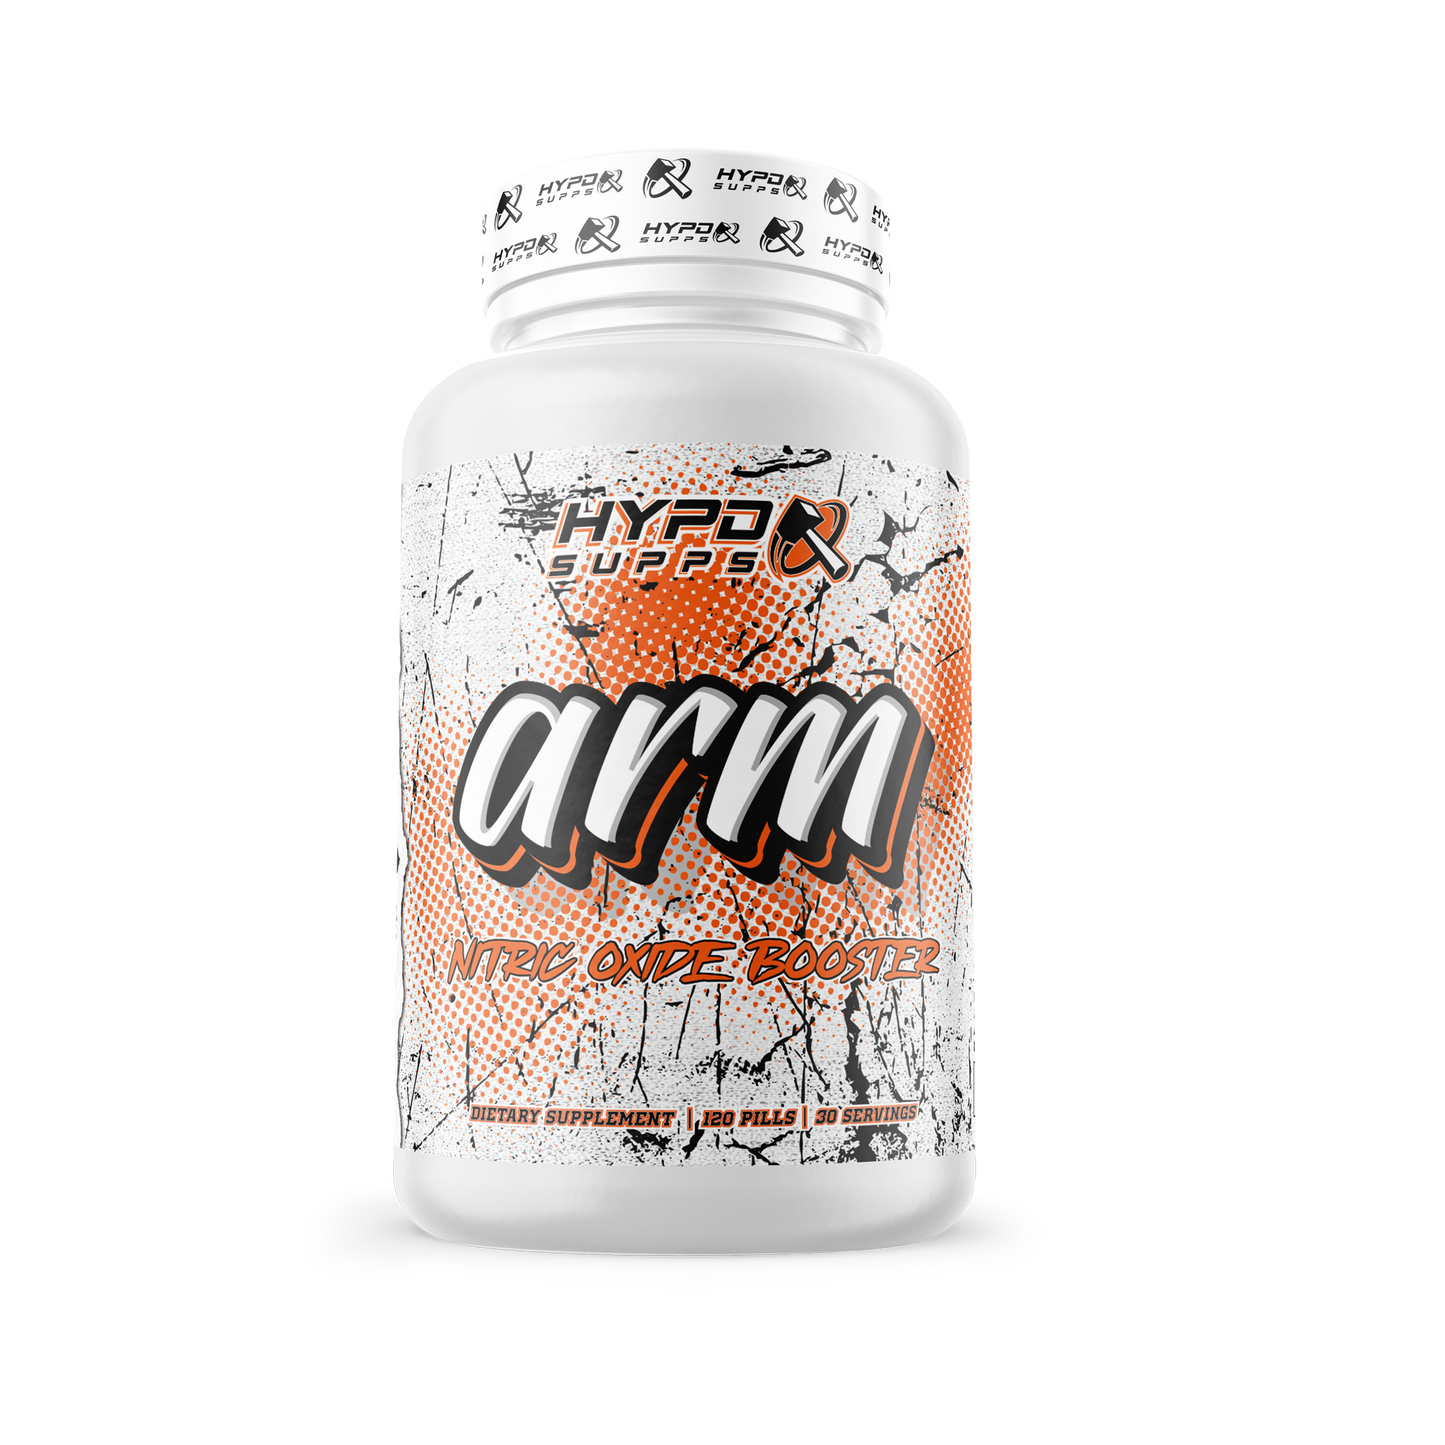 ARM Nitric Oxide Booster by Hypd Supps